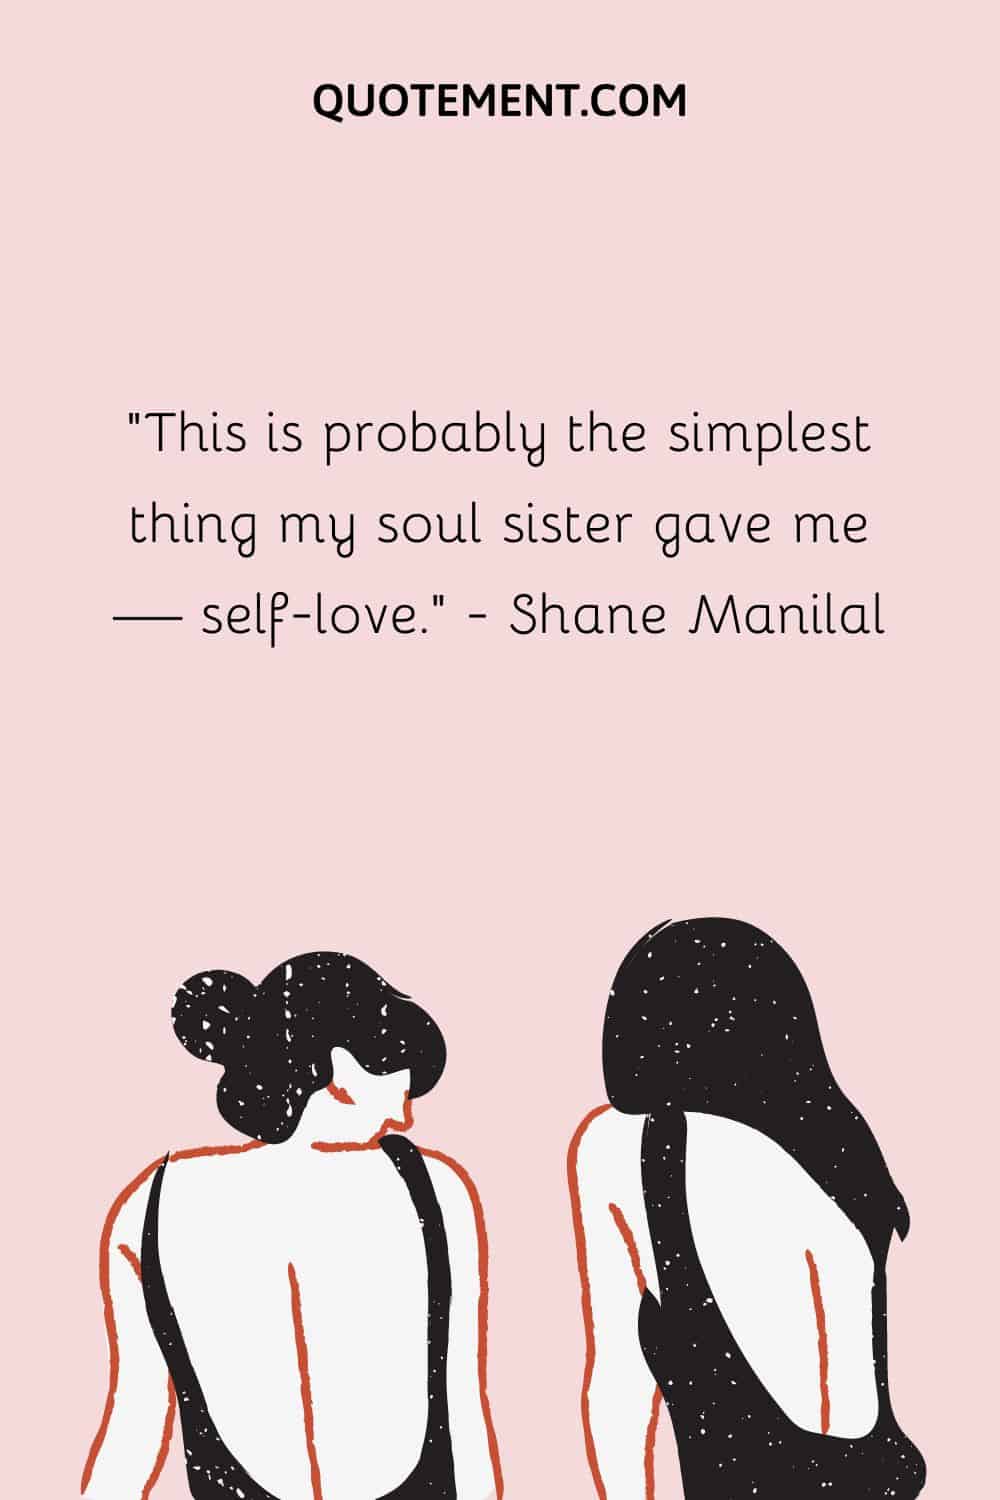 This is probably the simplest thing my soul sister gave me — self-love